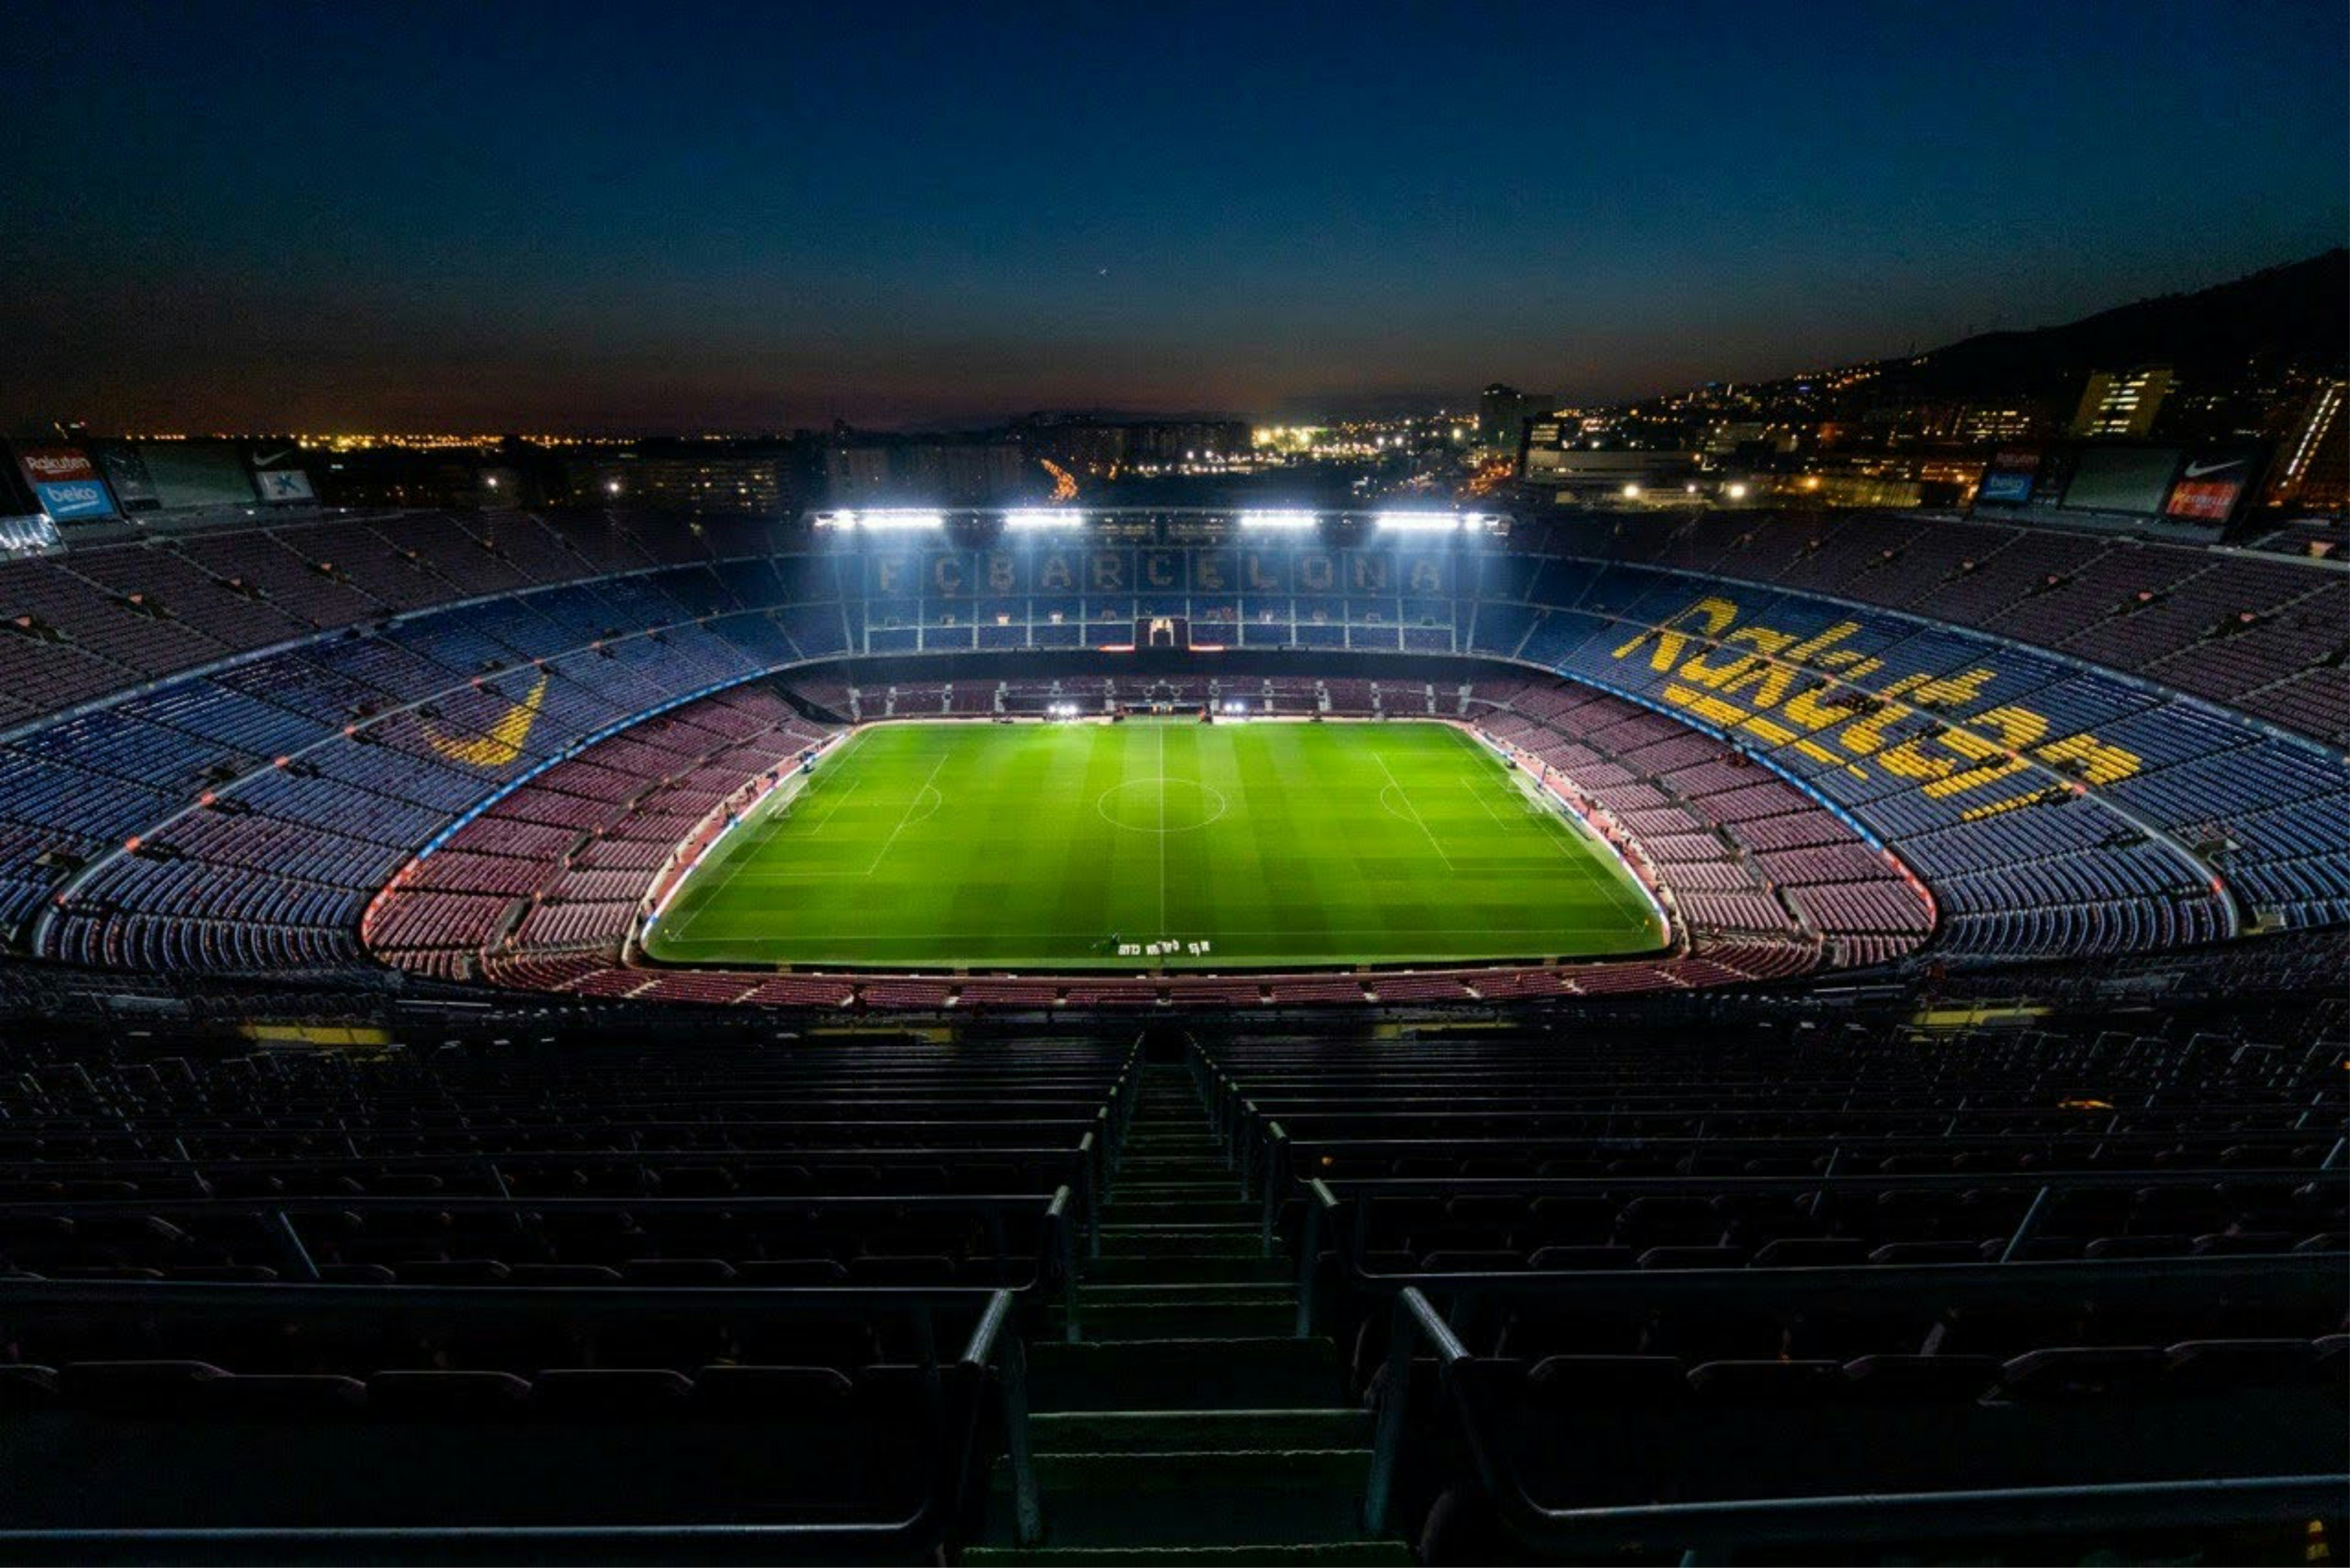 View from the top of the Estadio Camp Nou in Barcelona.